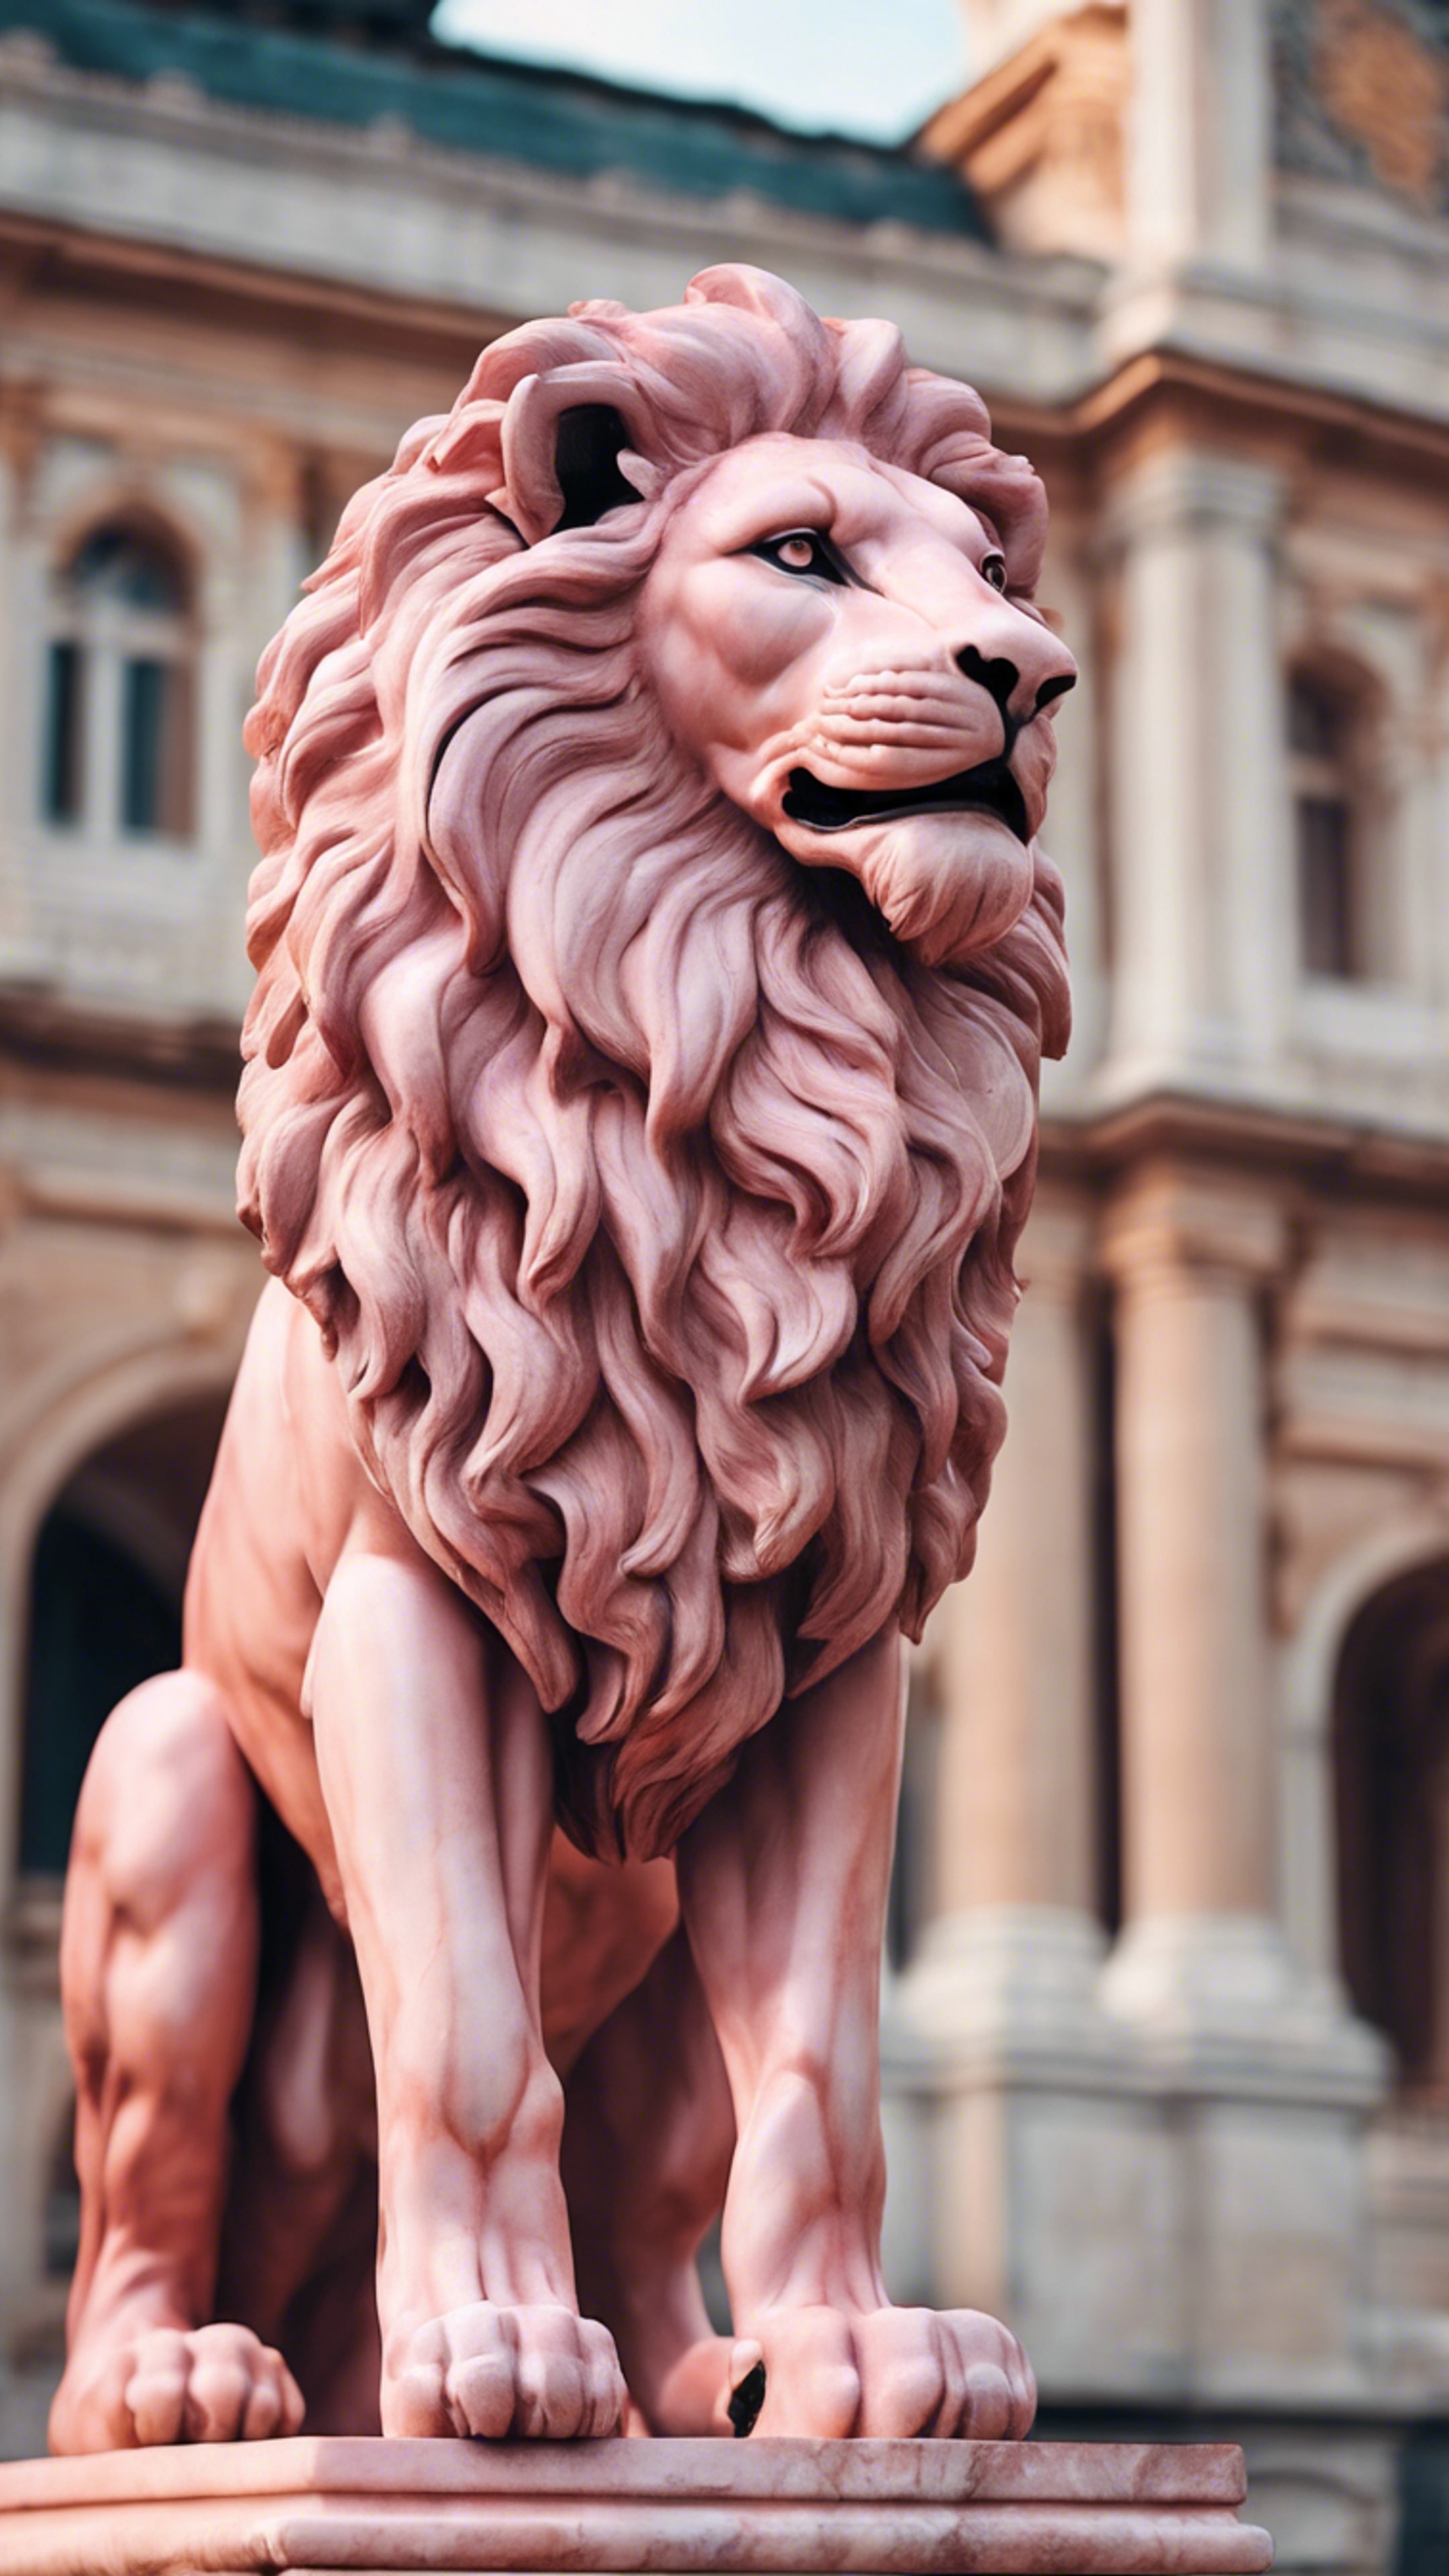 A pink marble sculpture of a lion in front of a palace.壁紙[356301f8e33e4aa59424]